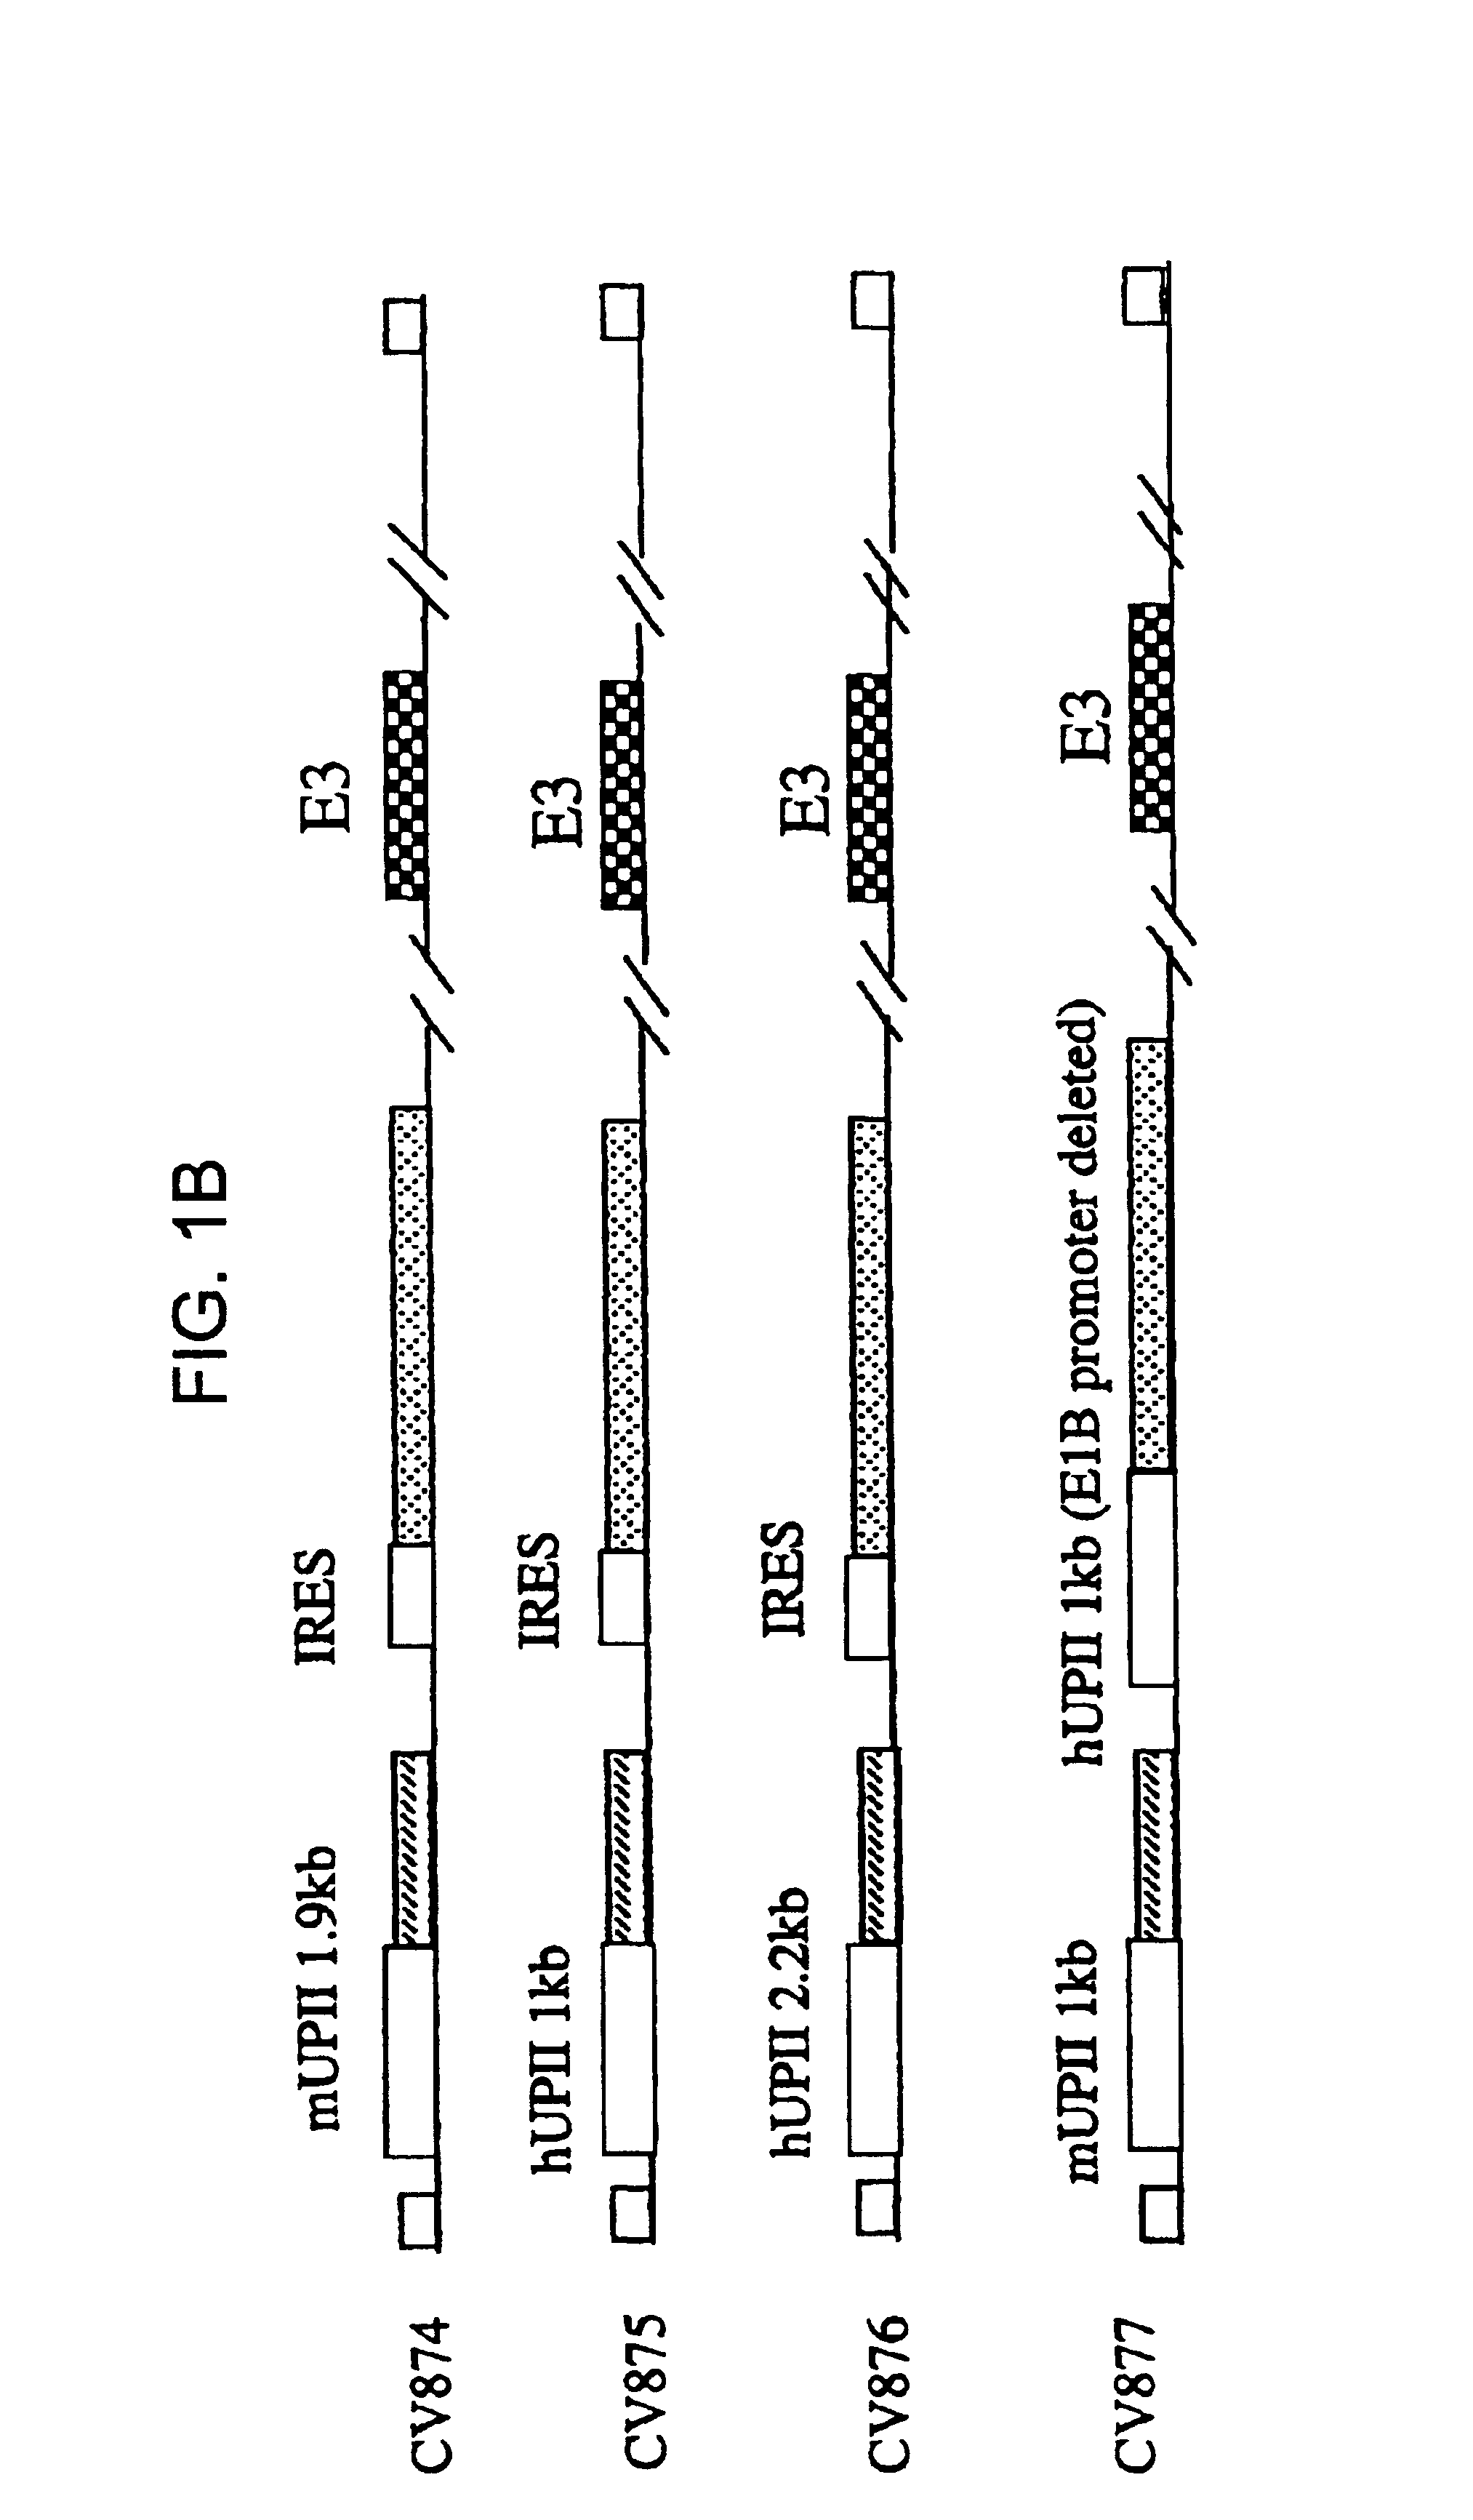 Methods of treating neoplasia with combination of target-cell specific adenovirus, chemotherapy and radiation